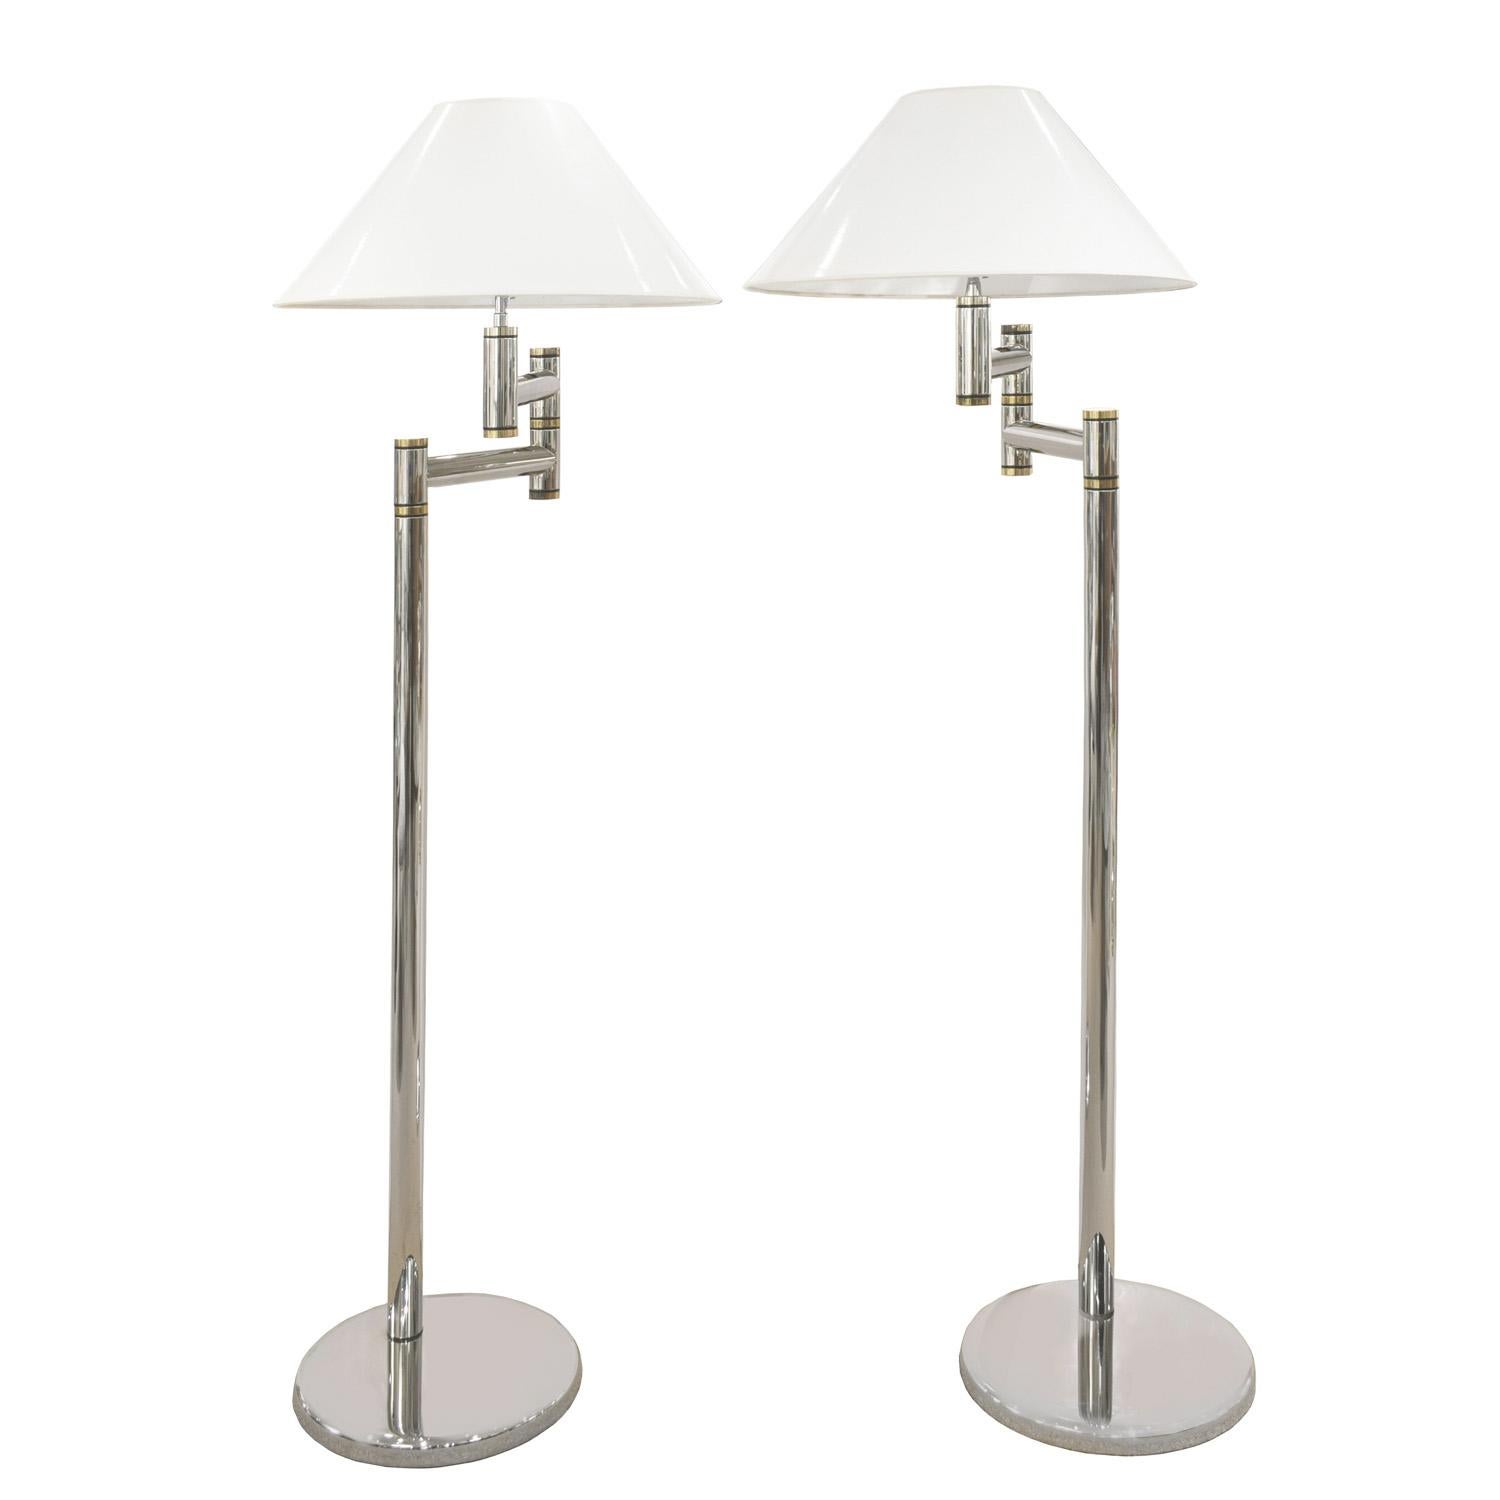 Pair of meticulously crafted swing-arm floor lamps in polished chrome and brass by Karl Springer, American 1980's. The quality of construction of these lamps is superb. These have been cleaned and polished and newly rewired by Lobel Modern.

Arm